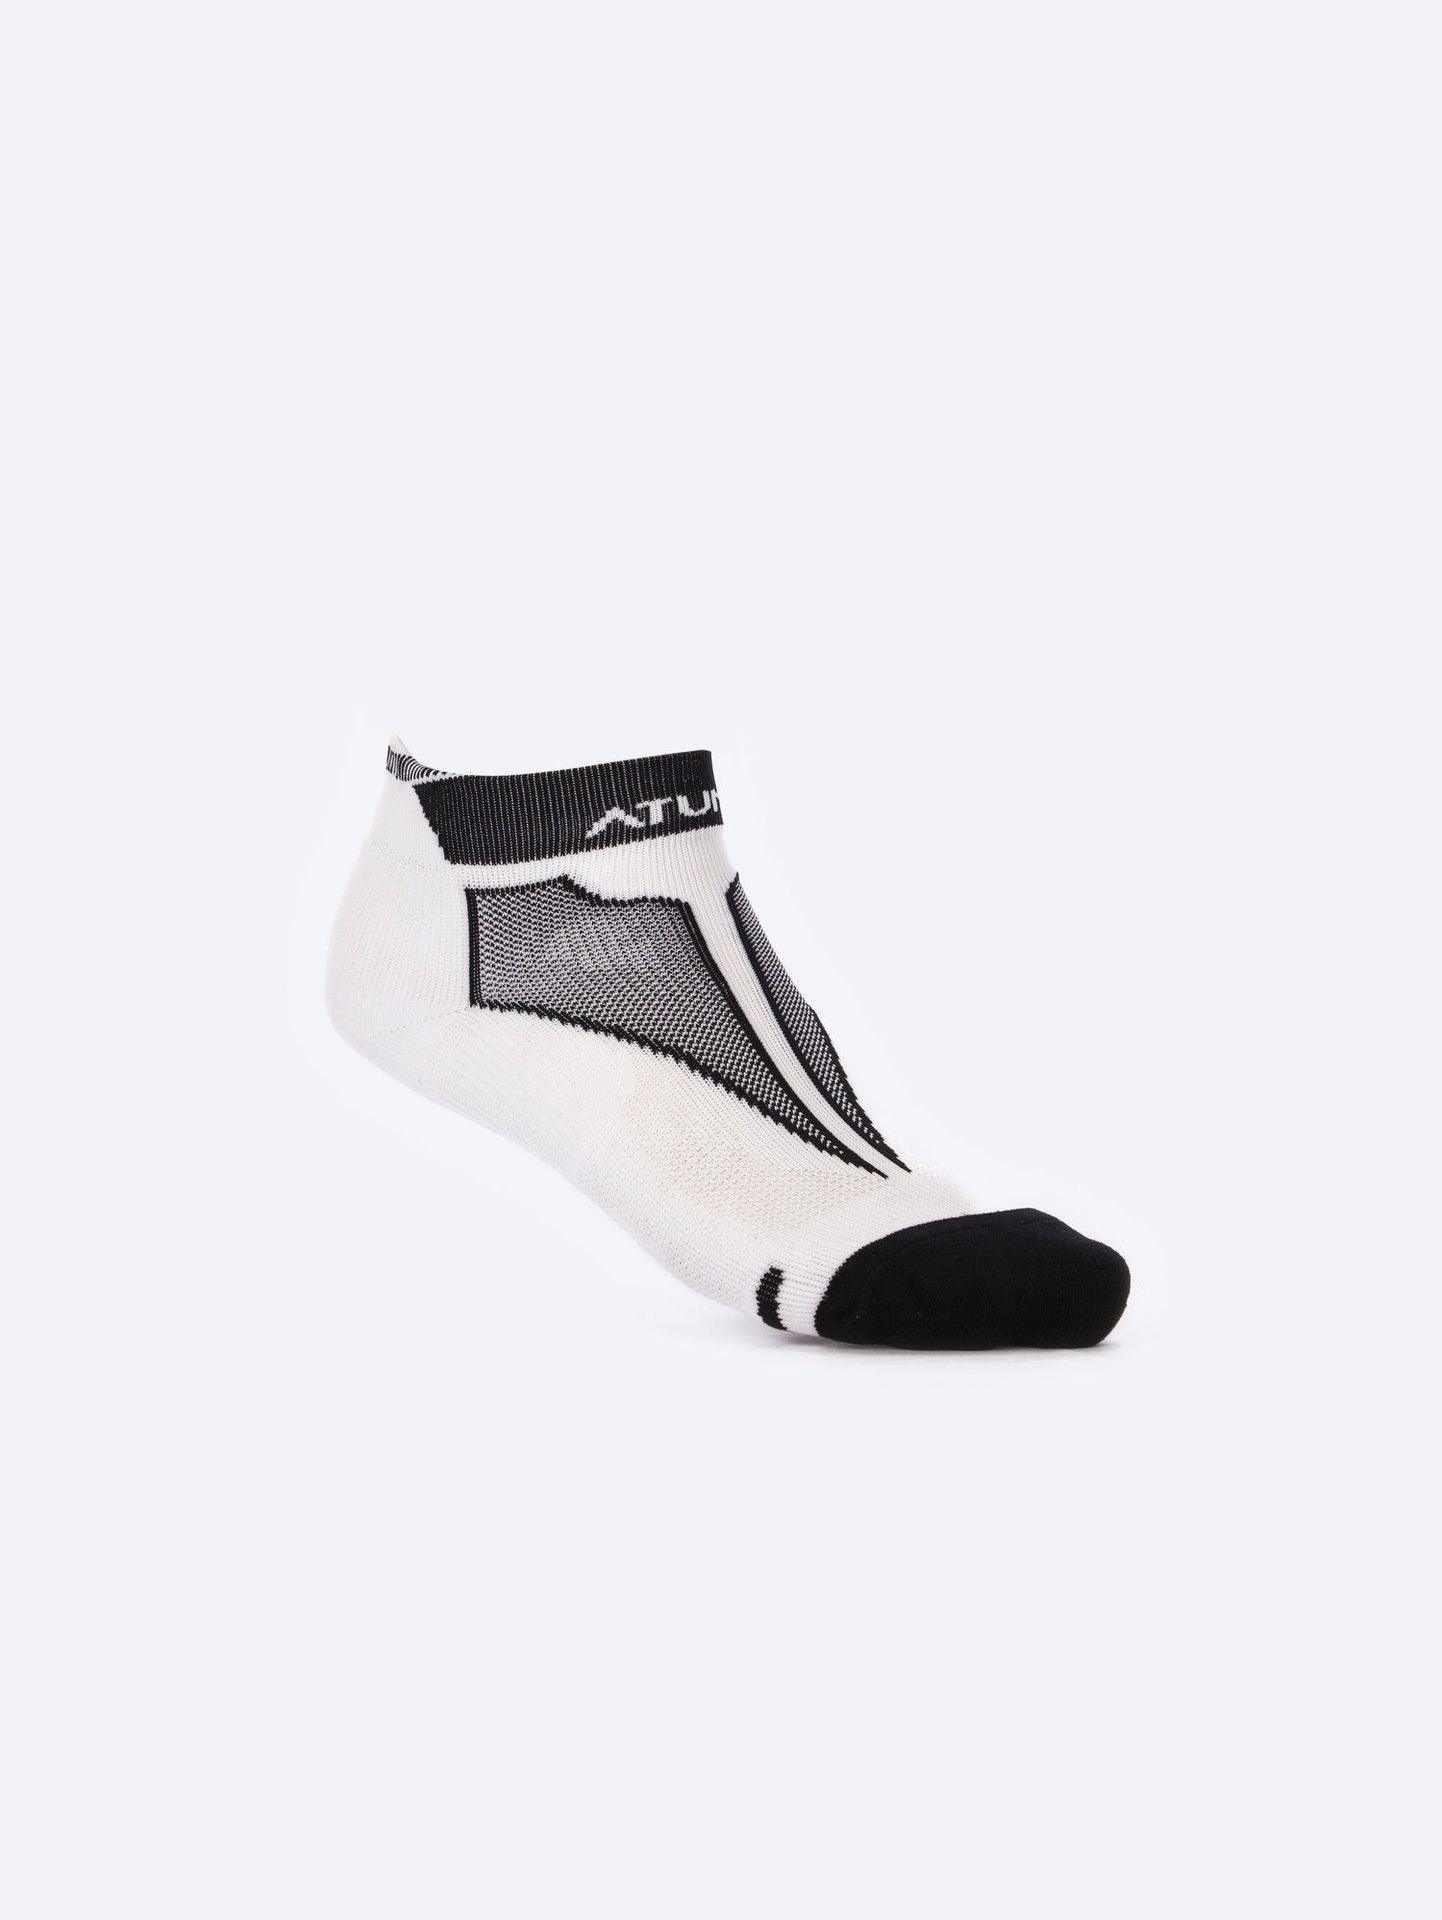 Photo by 𝗔𝗧𝗨𝗠 SPORTSWEAR ® on December 26, 2022. May be of g white/black low-cut kid's socks with atum logo